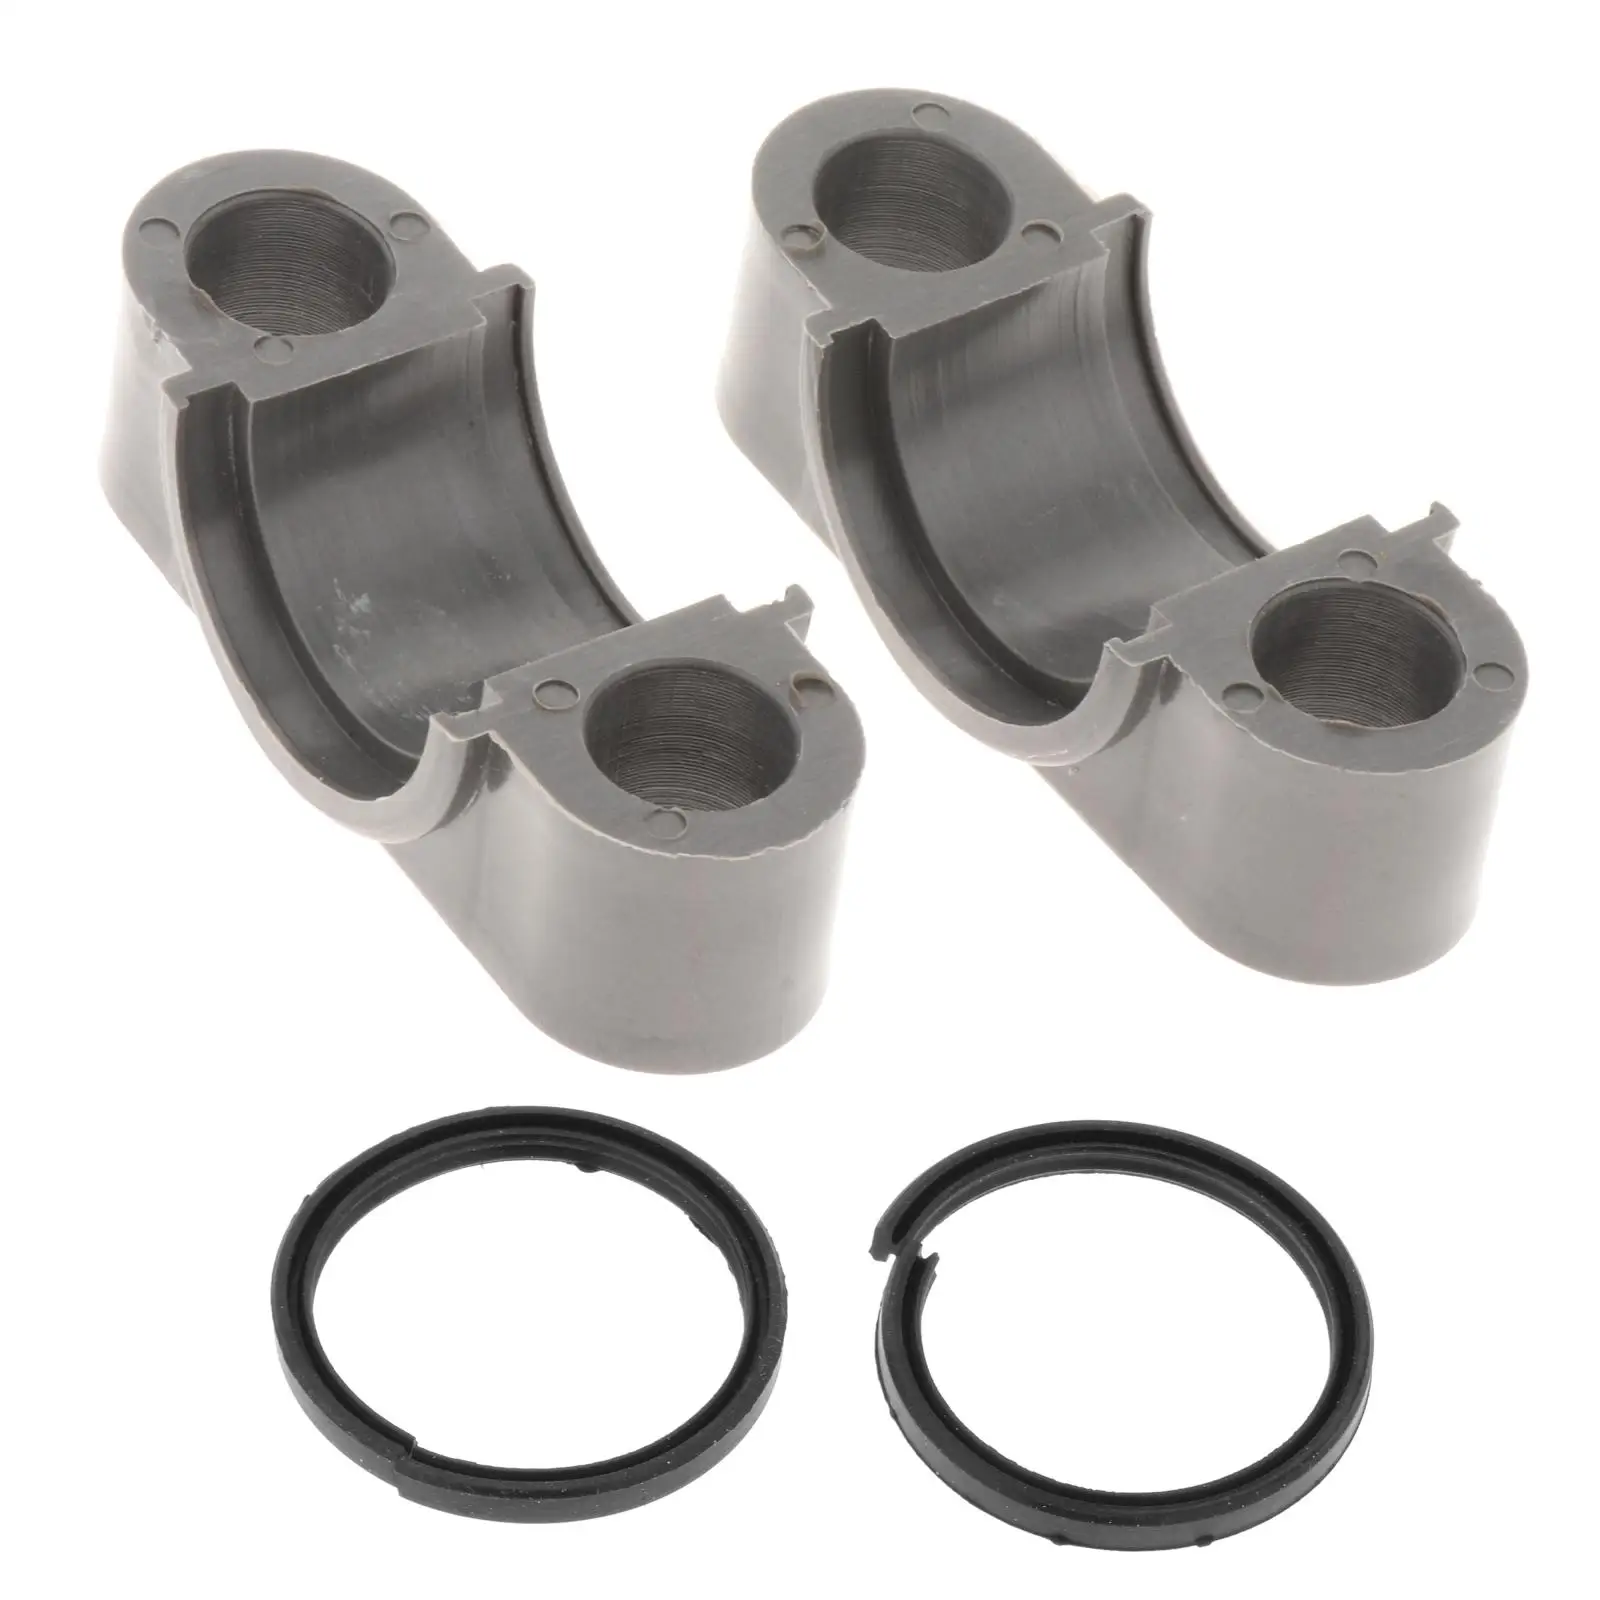 Motorcycle Steering Stem Bushing Seal Yamaha 450 Warrior 1UY-23812-00-00 Replace Accessories Parts Easy Install